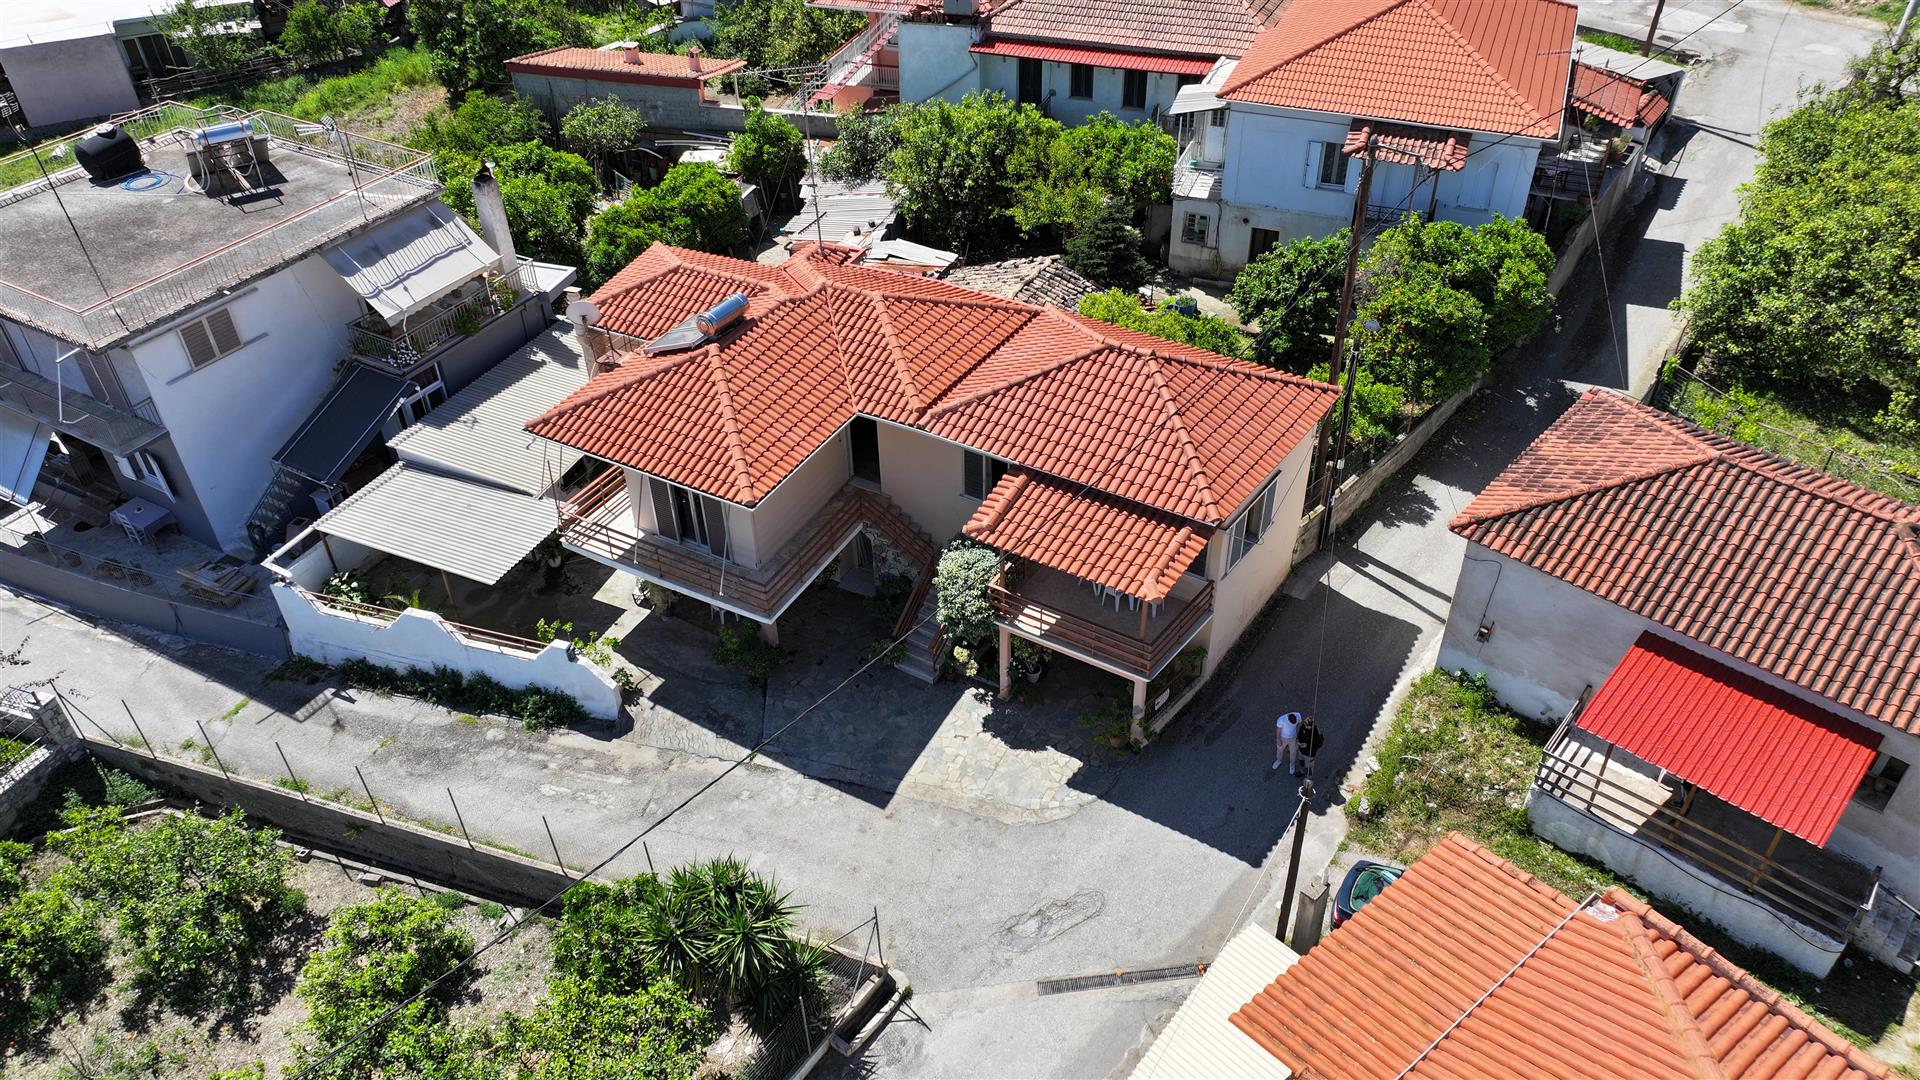 Two-Storey Building 157 Sq.M. With Two Independent Residences In Rizomylos, Diakopto